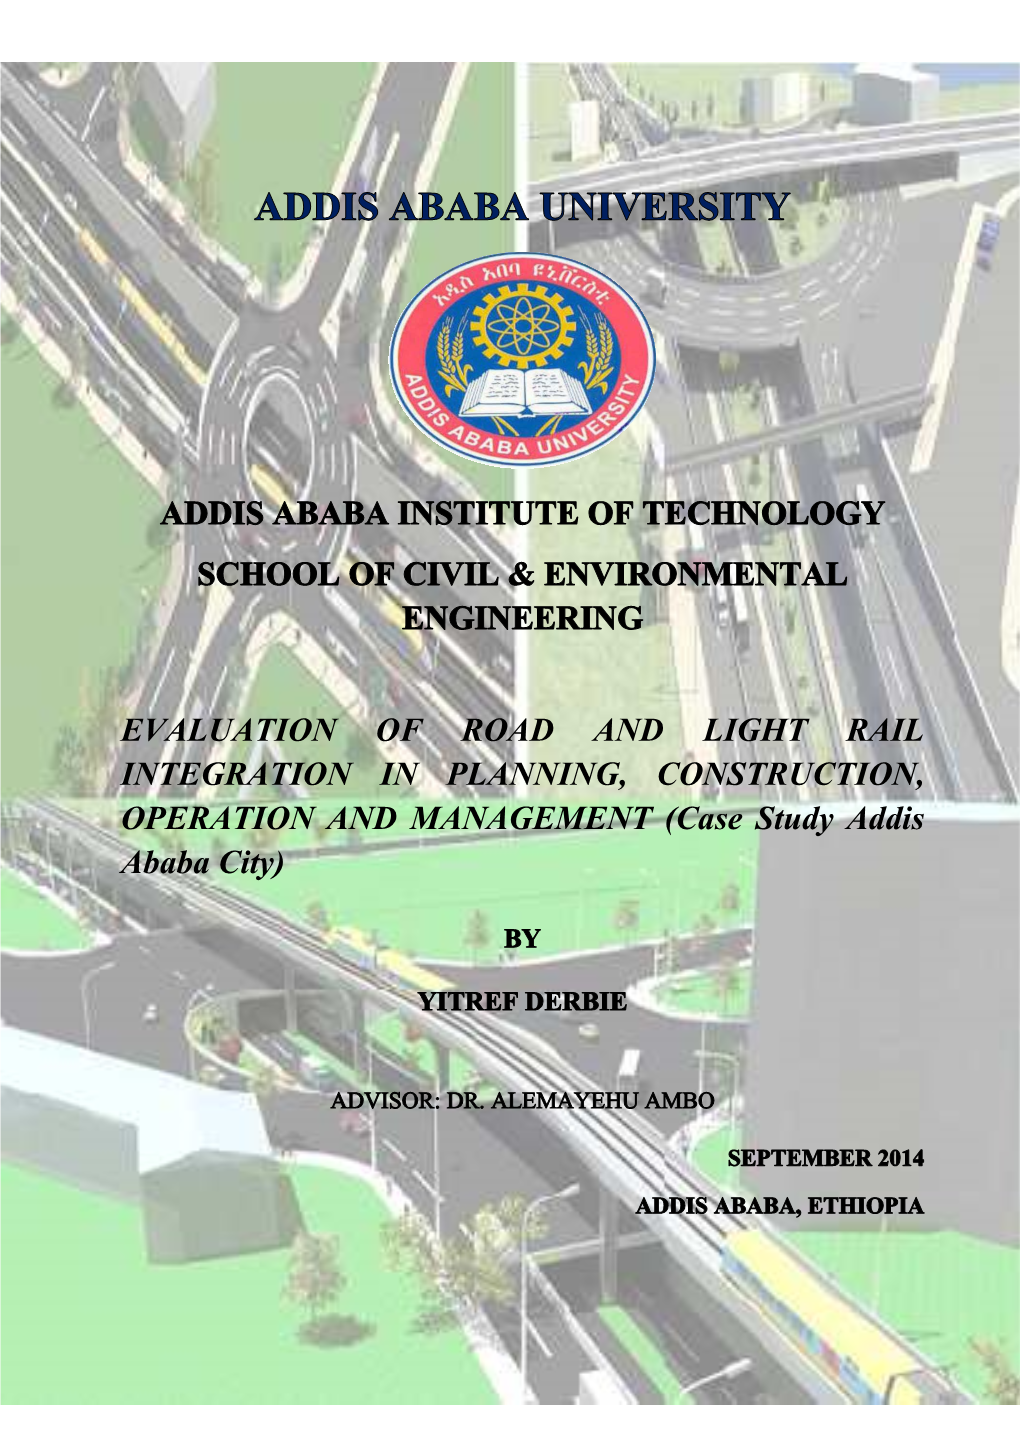 Evaluation of Road and Light Rail Integration in Planning